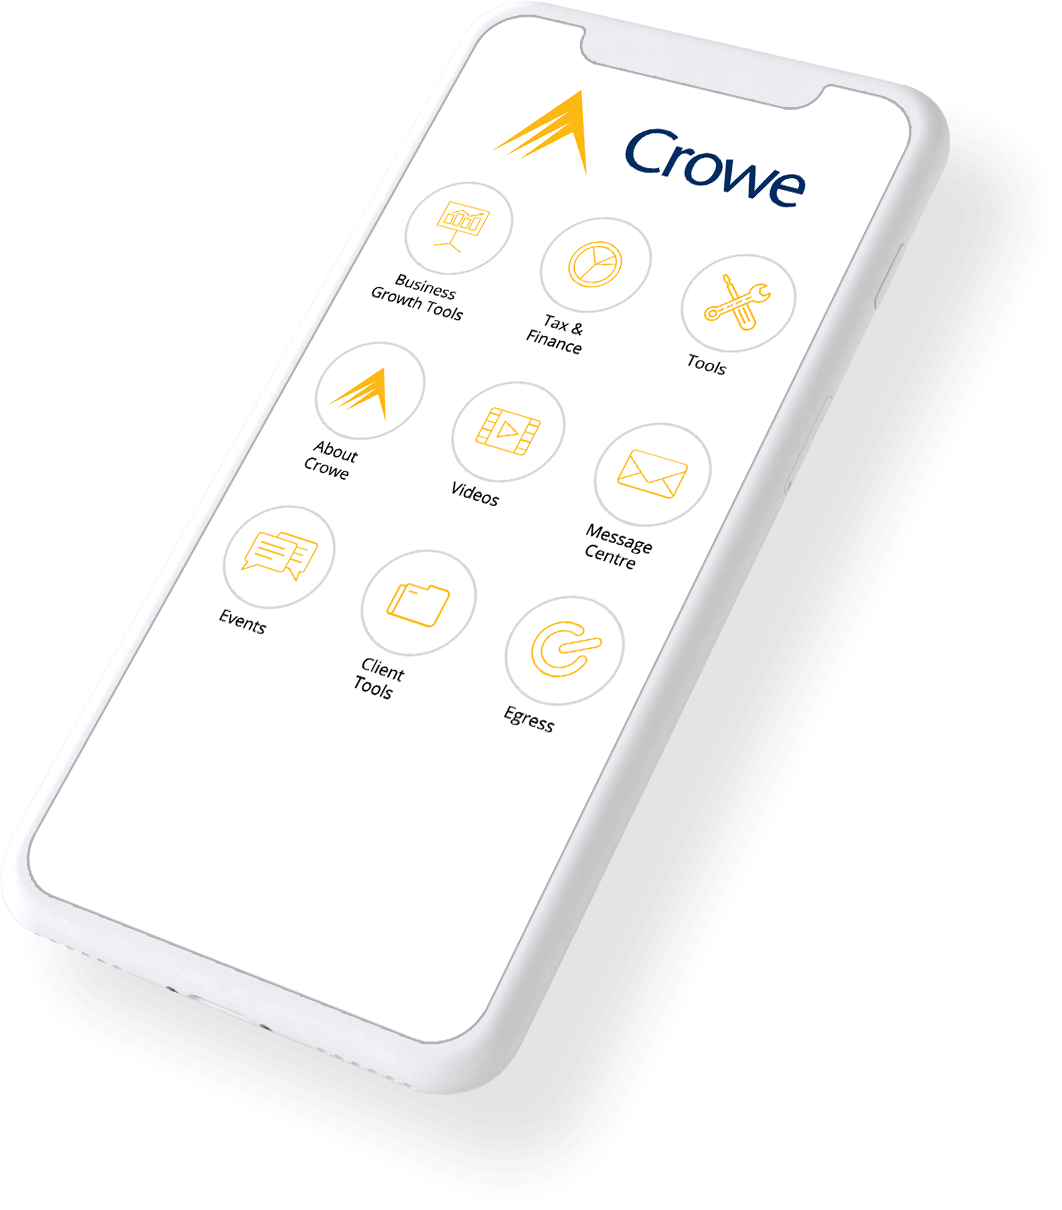 A branded app home screen for Crowe, on a mobile phone.